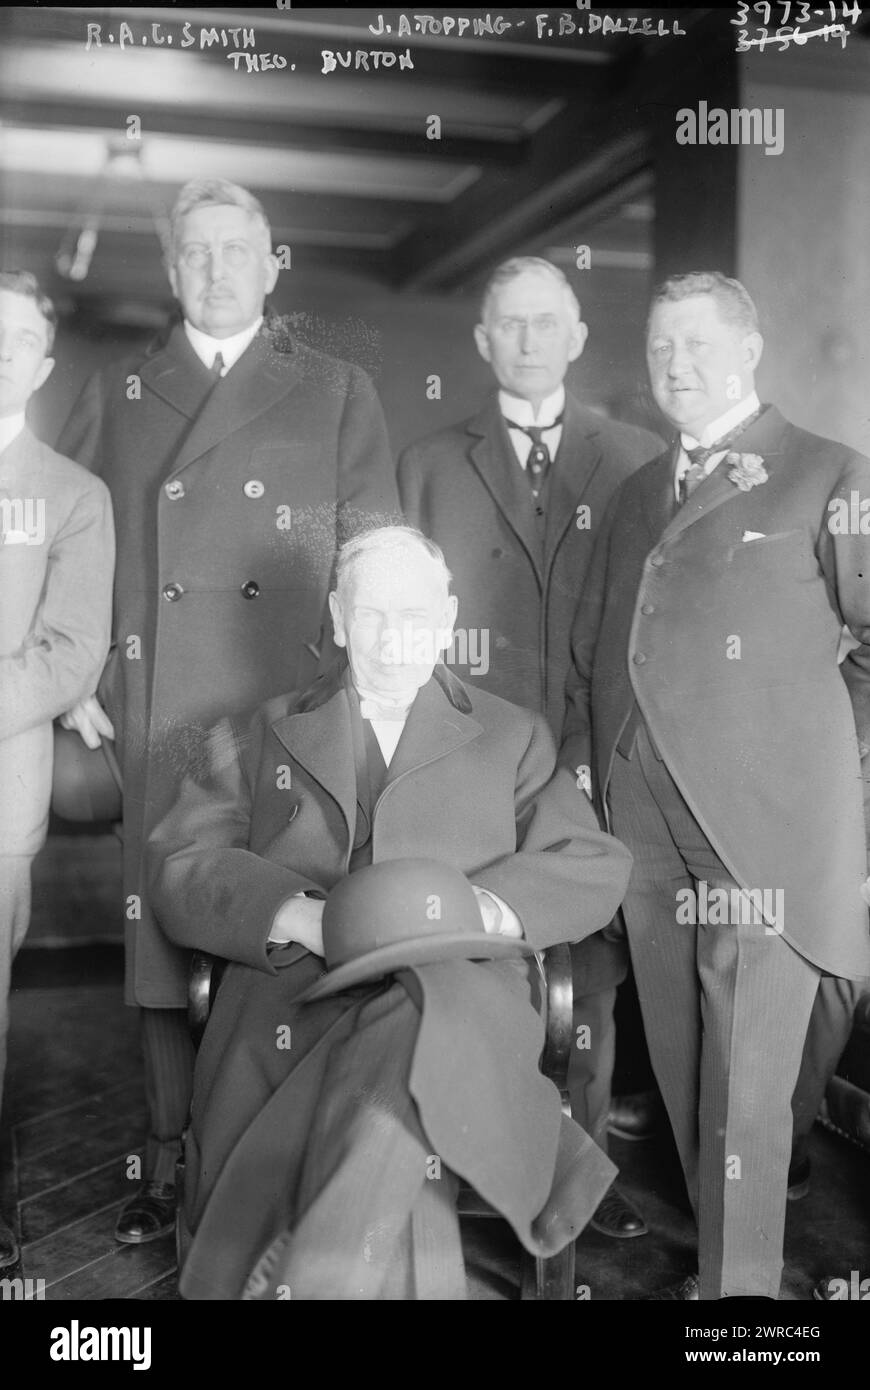 R.A.C. Smith, J.A. Topping, F.B. Dalzell, Theo. Burton, Photograph shows businessman Robert Alexander Conrad Smith (1857-1933) who served as New York City Commissioner of Docks, John A. Topping who was chairman of Republic Iron and Steel Company, Frederick P. Dalzell of the Dalzell towing company and Theodore Elijah Burton (1851-1919), who served as a Republican Representative and Senator from Ohio in the U.S. Congress., between ca. 1915 and ca. 1920, Glass negatives, 1 negative: glass Stock Photo